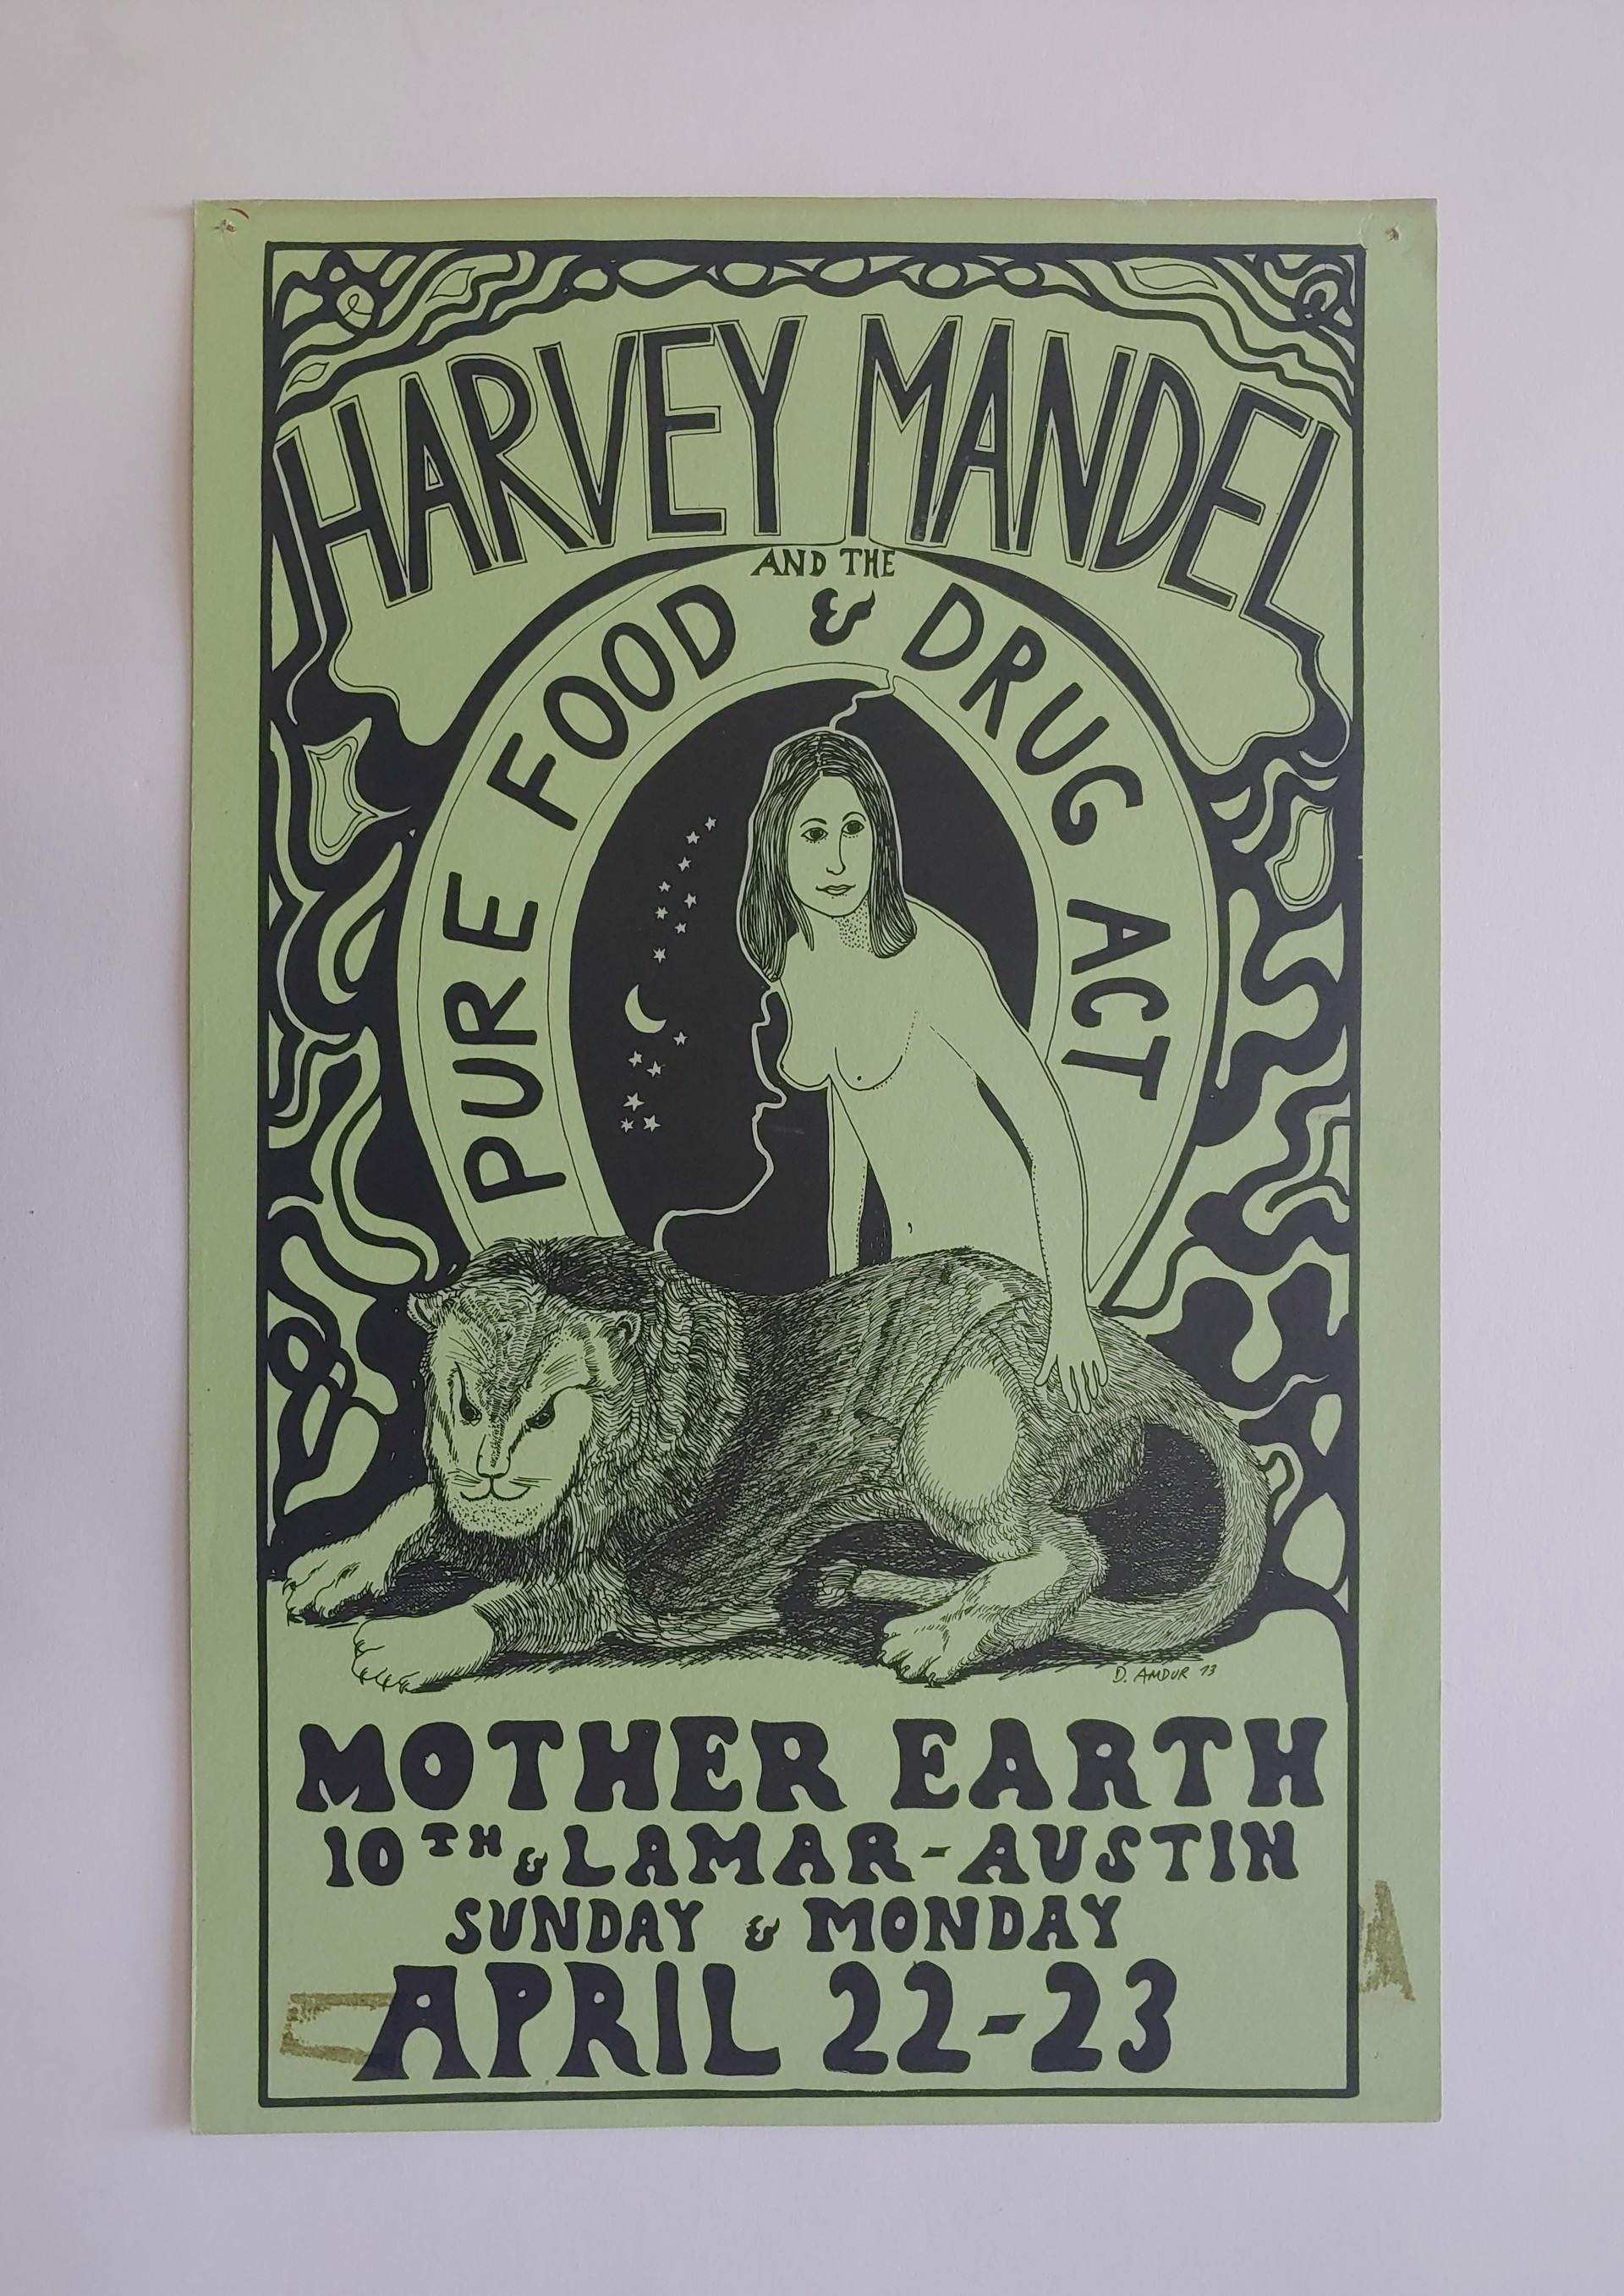 Harvey Mandel and the Pure Food & Drug Act - Original Drawing for Poster by David Amdur